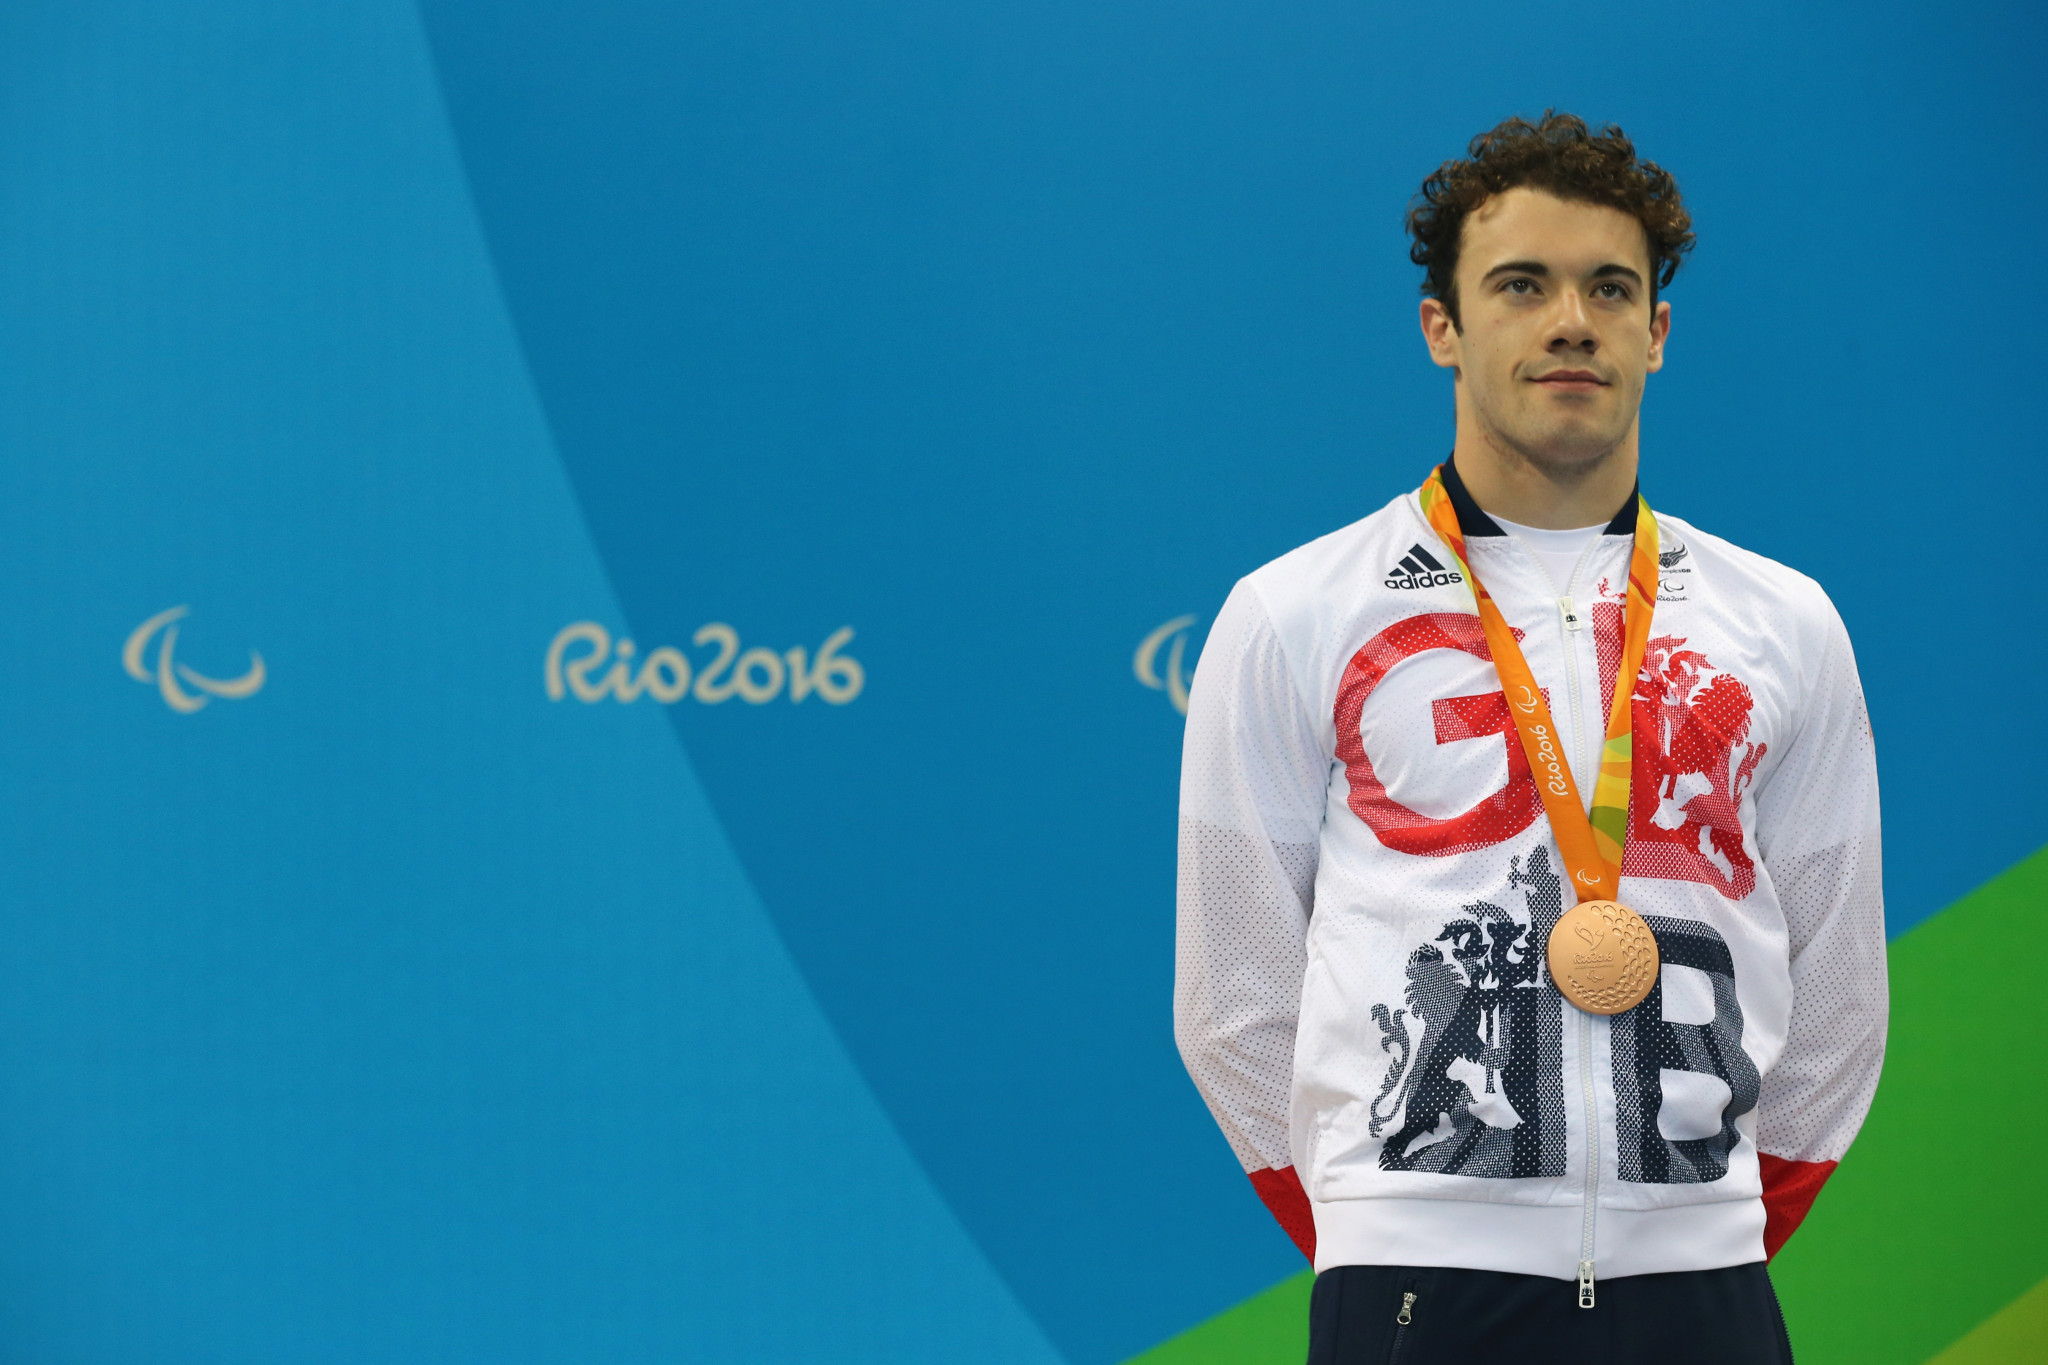 Josef Craig of Great Britain won bronze in the 100m freestyle at the Rio 2016 Paralympic Games ©Getty Images